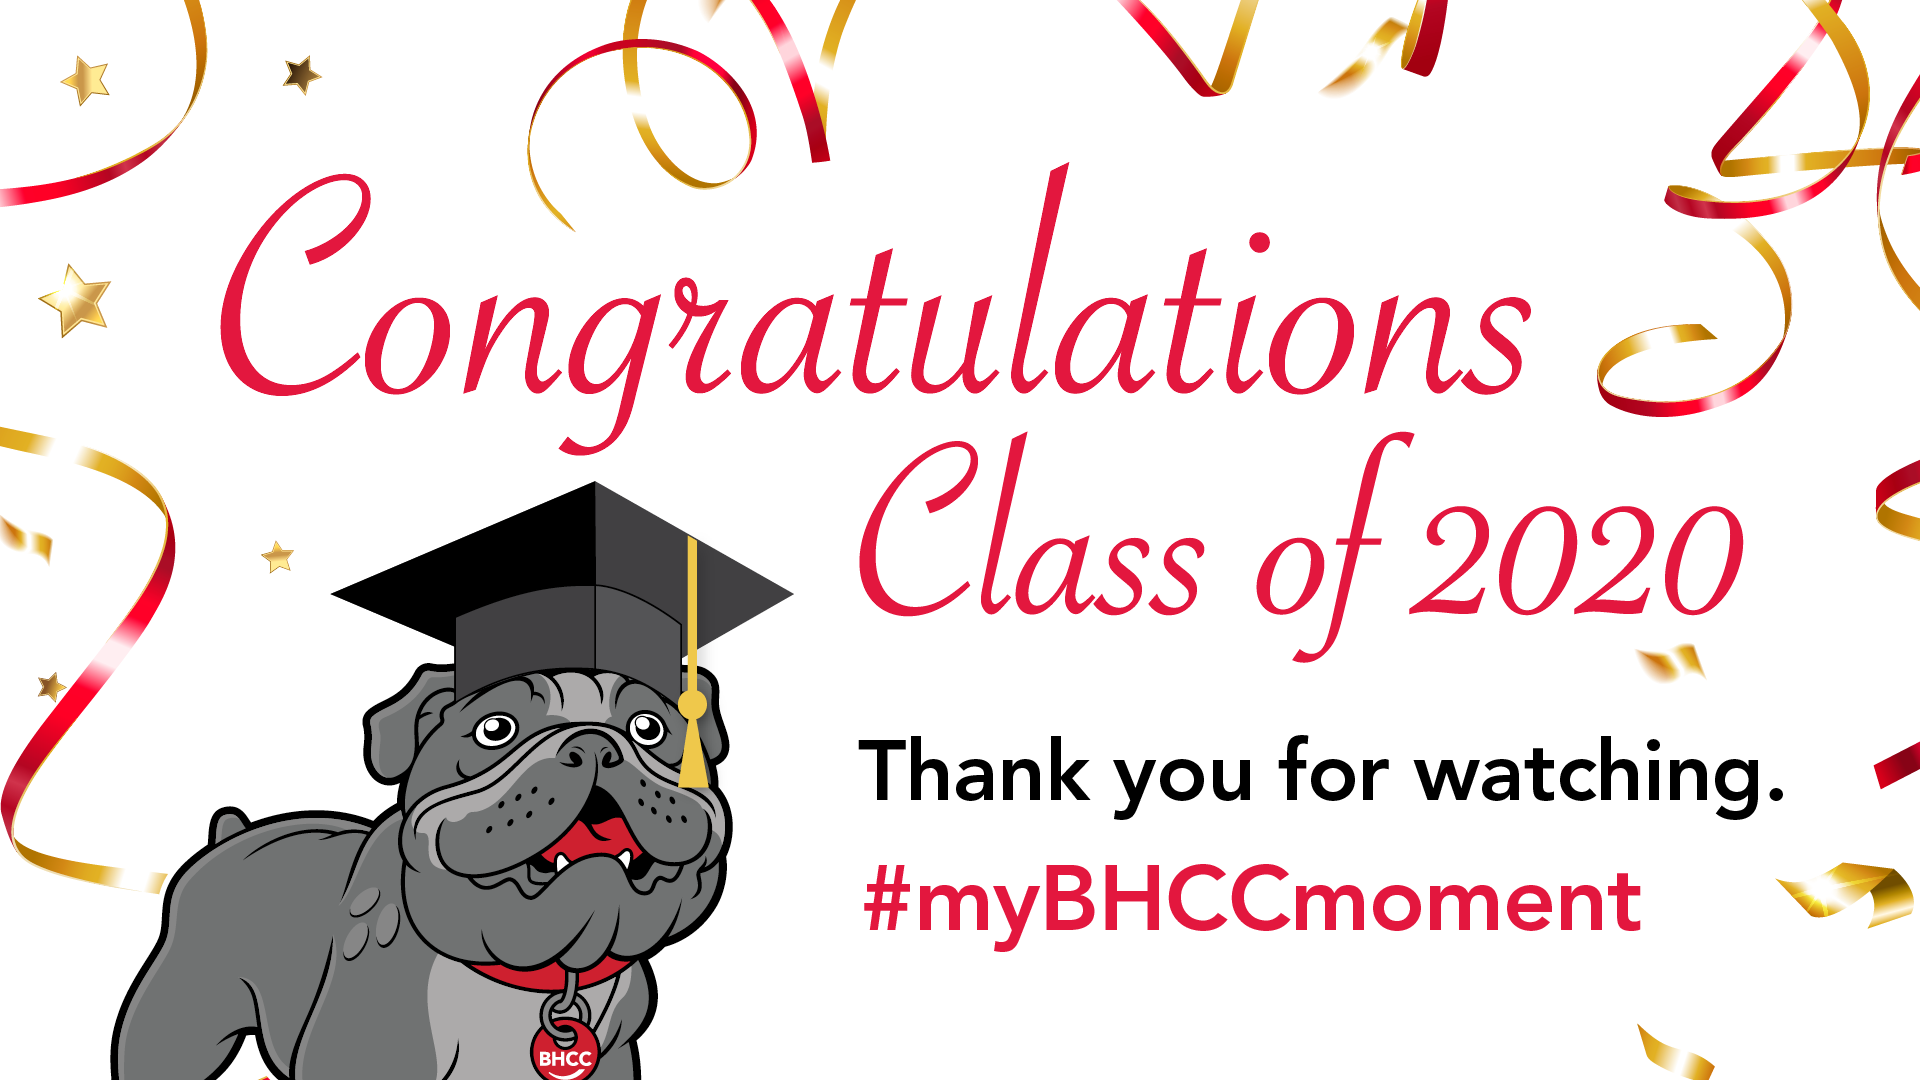 Congratulations Class of 2020. Thank you for watching. #myBHCCmoment